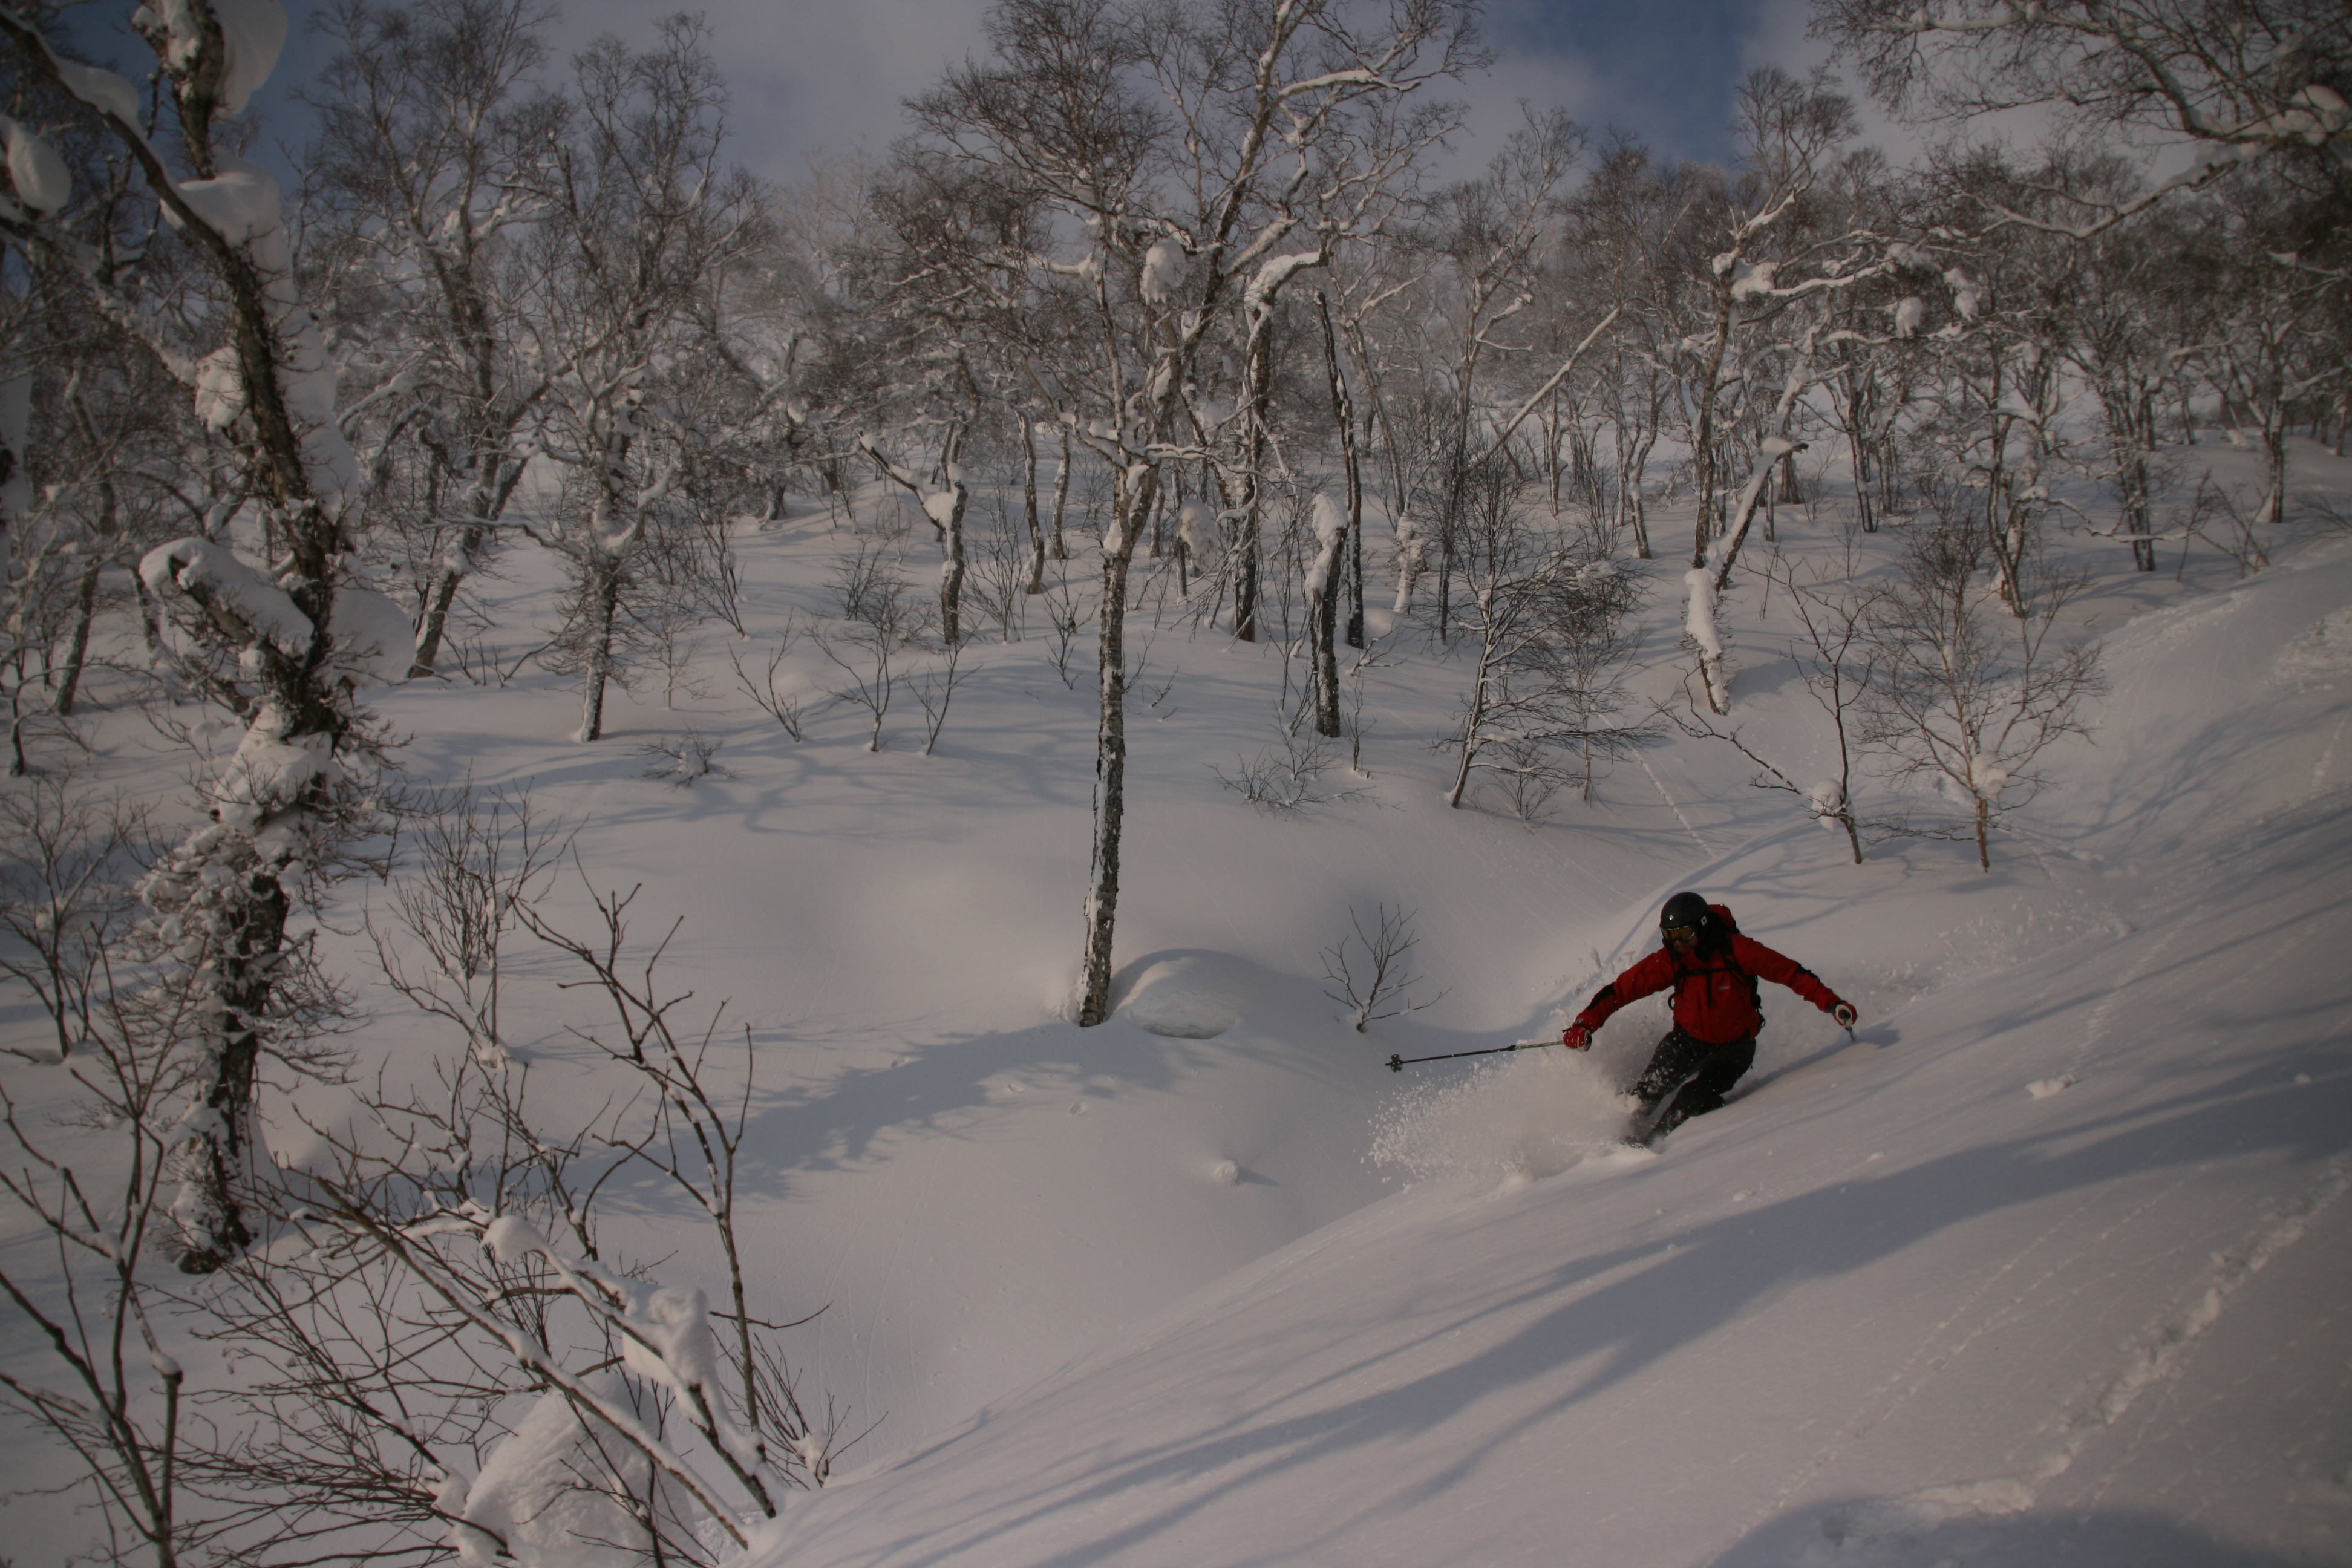 Anders Aidanp skiing the beautiful forest in Hokkaido, Japan. Photo: Andreas Bengtsson